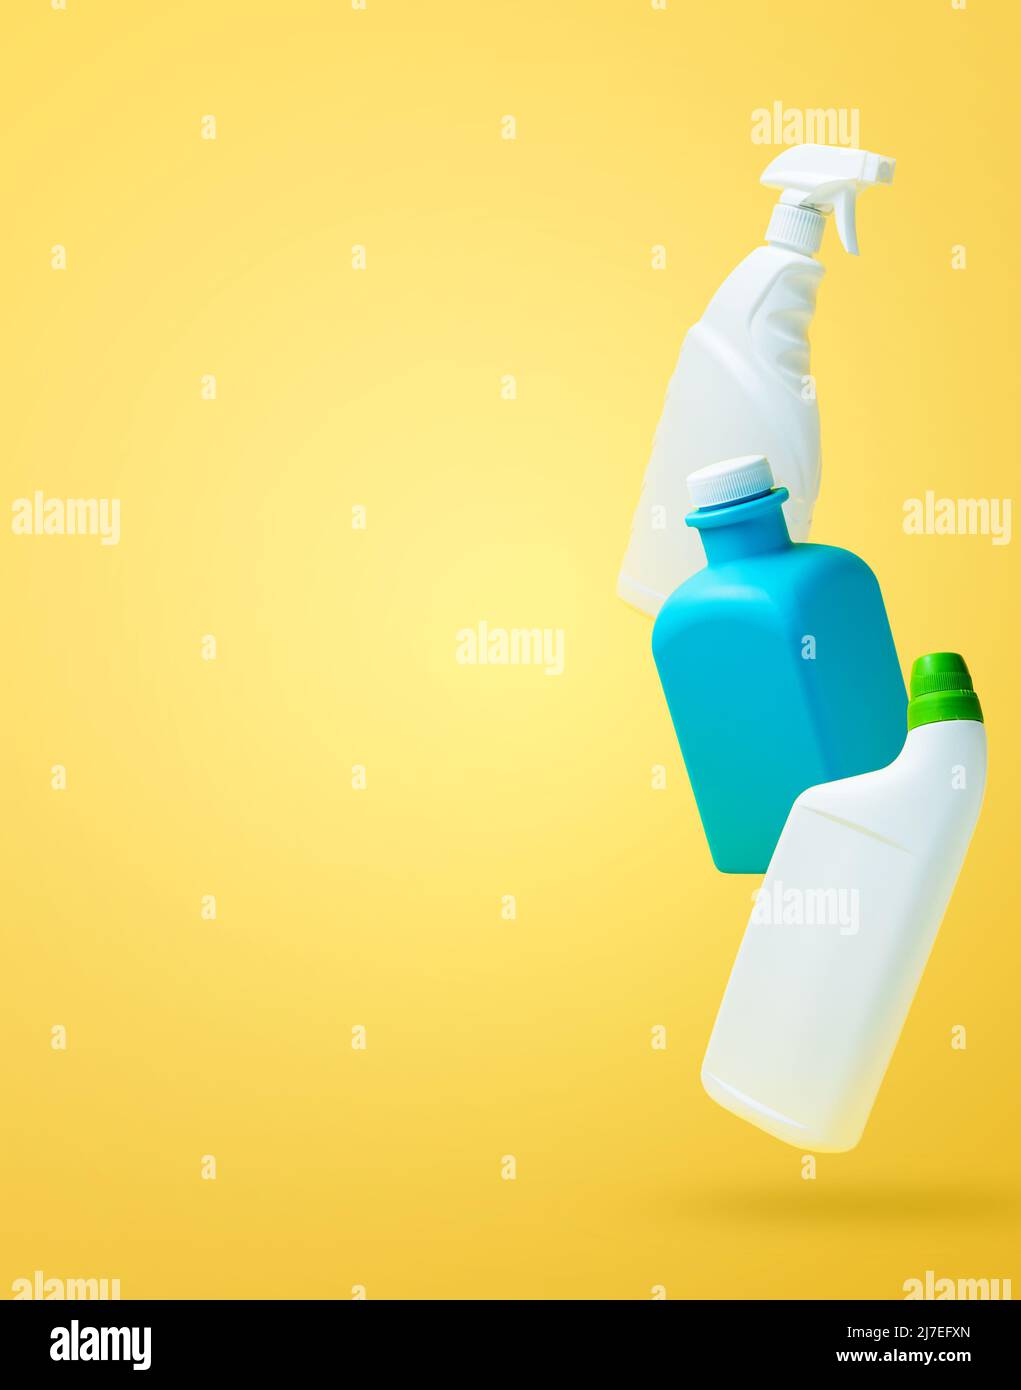 Levitation, falling in air blank household chemical bottles for cleaning the house. Isolated on yellow background. Plastic packaging. Toilet cleaner, detergent sprayer, soap. New brand product mockup Stock Photo